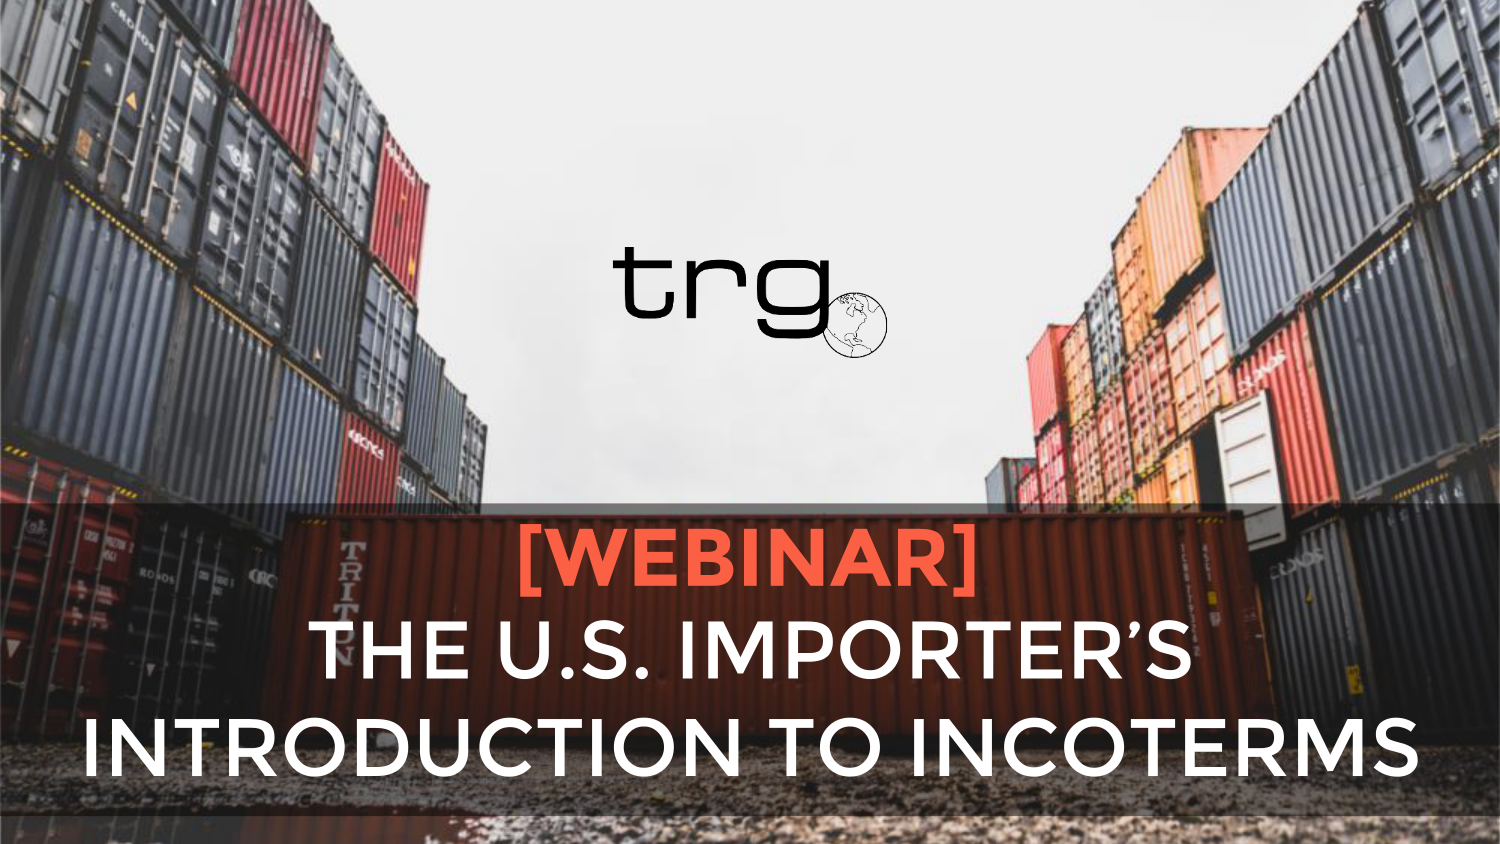 [Webinar] The U.S. Importer’s Introduction to Incoterms